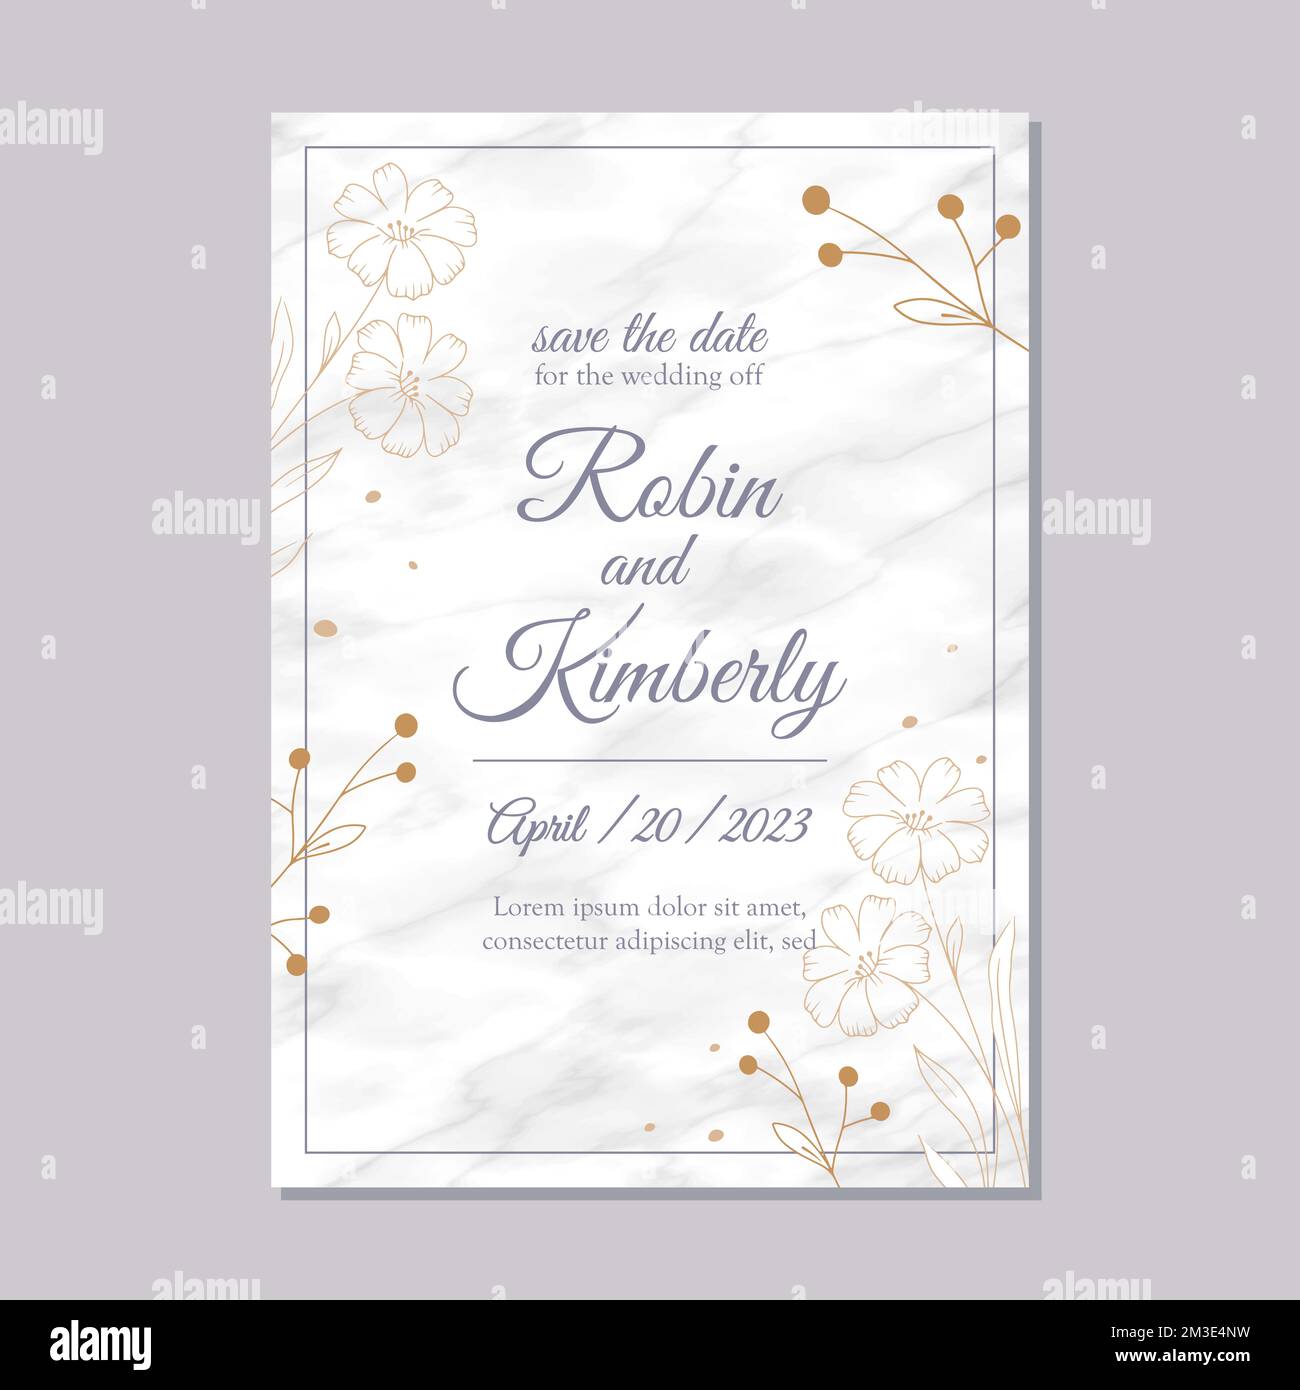 wedding invitation in A5 format with a minimalistic discreet floral design Stock Vector